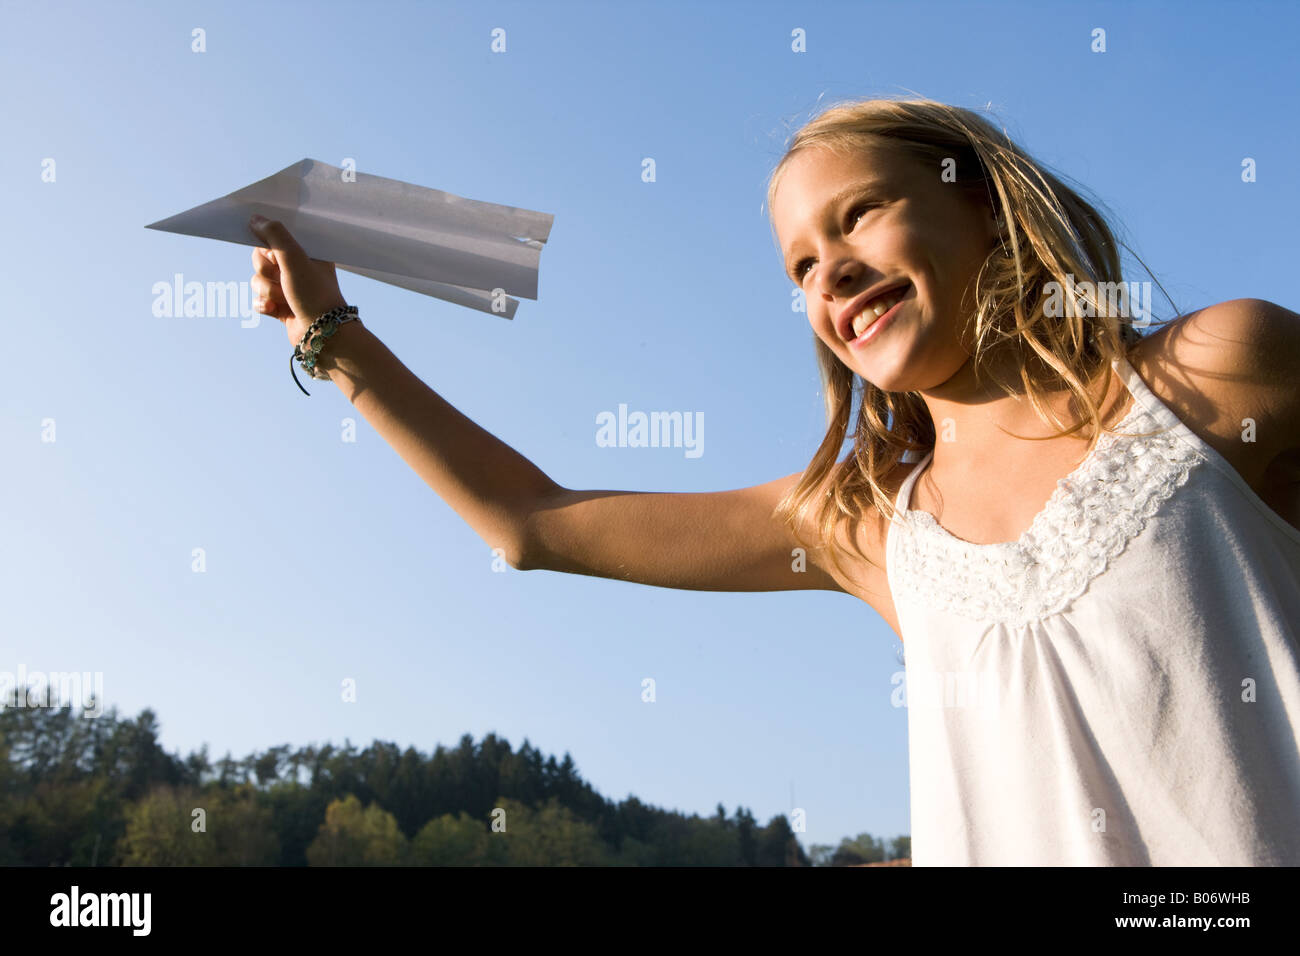 Gril playing with paper airplane Stock Photo